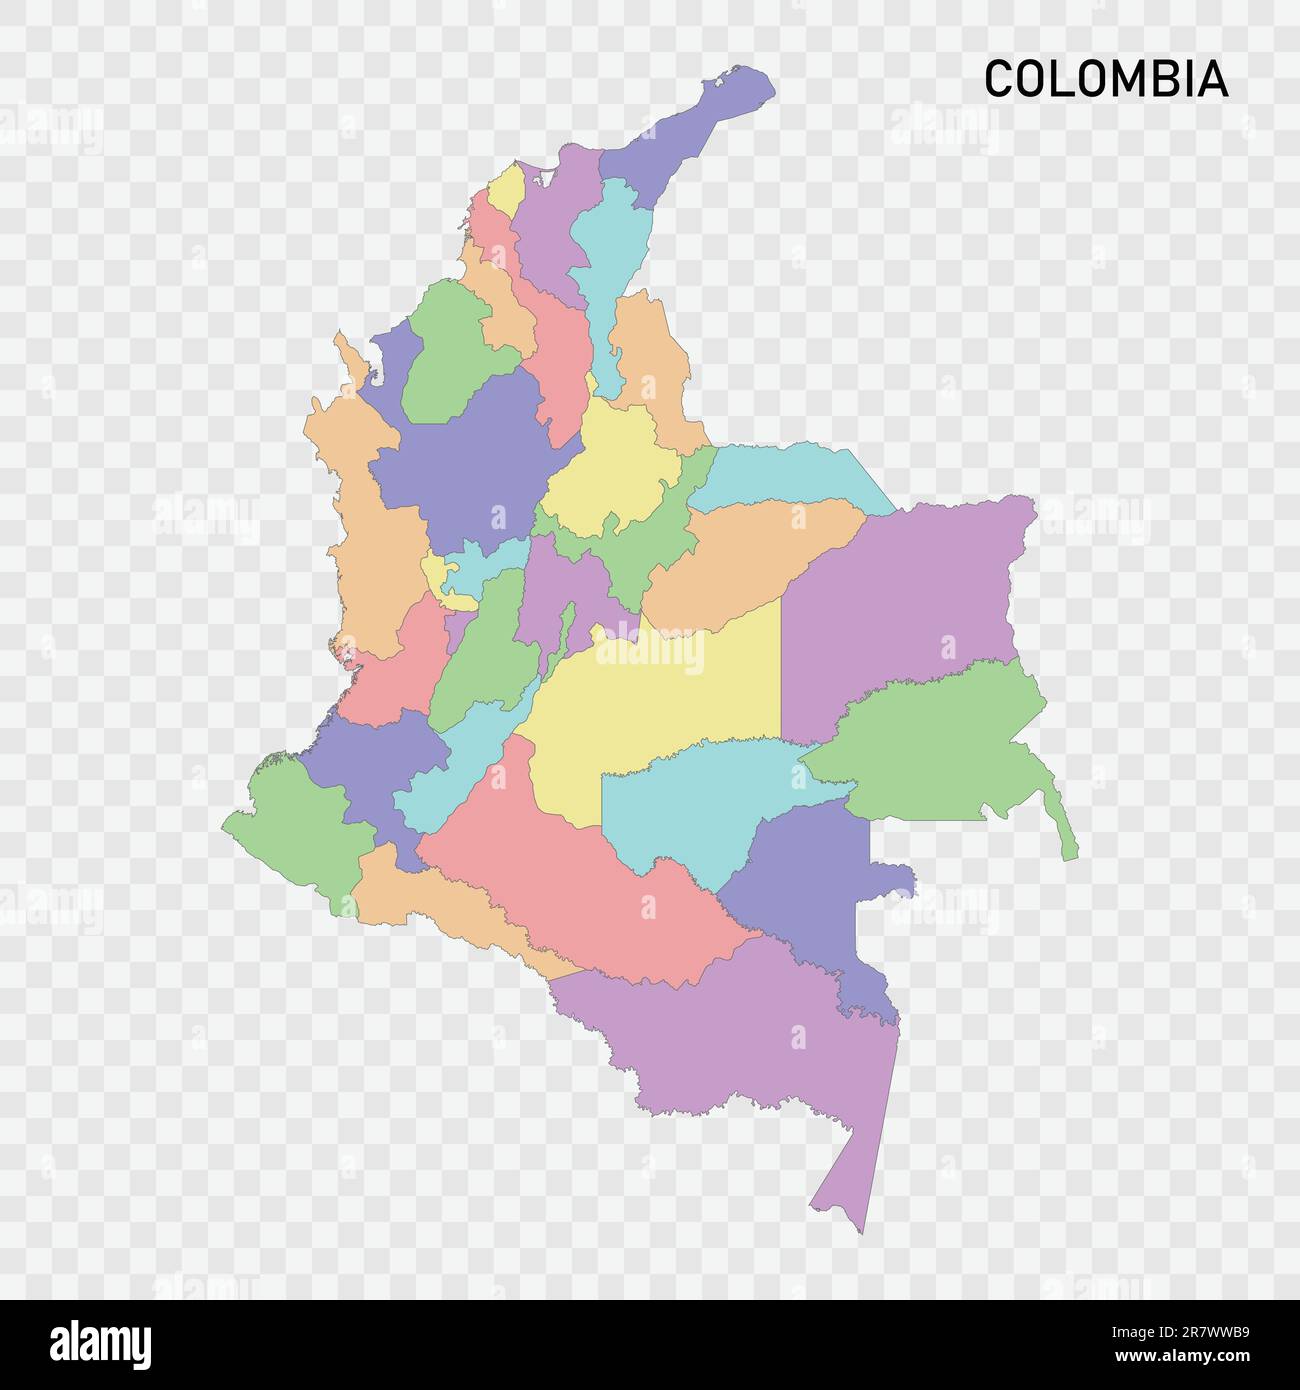 Isolated colored map of Colombia with borders of the regions Stock Vector